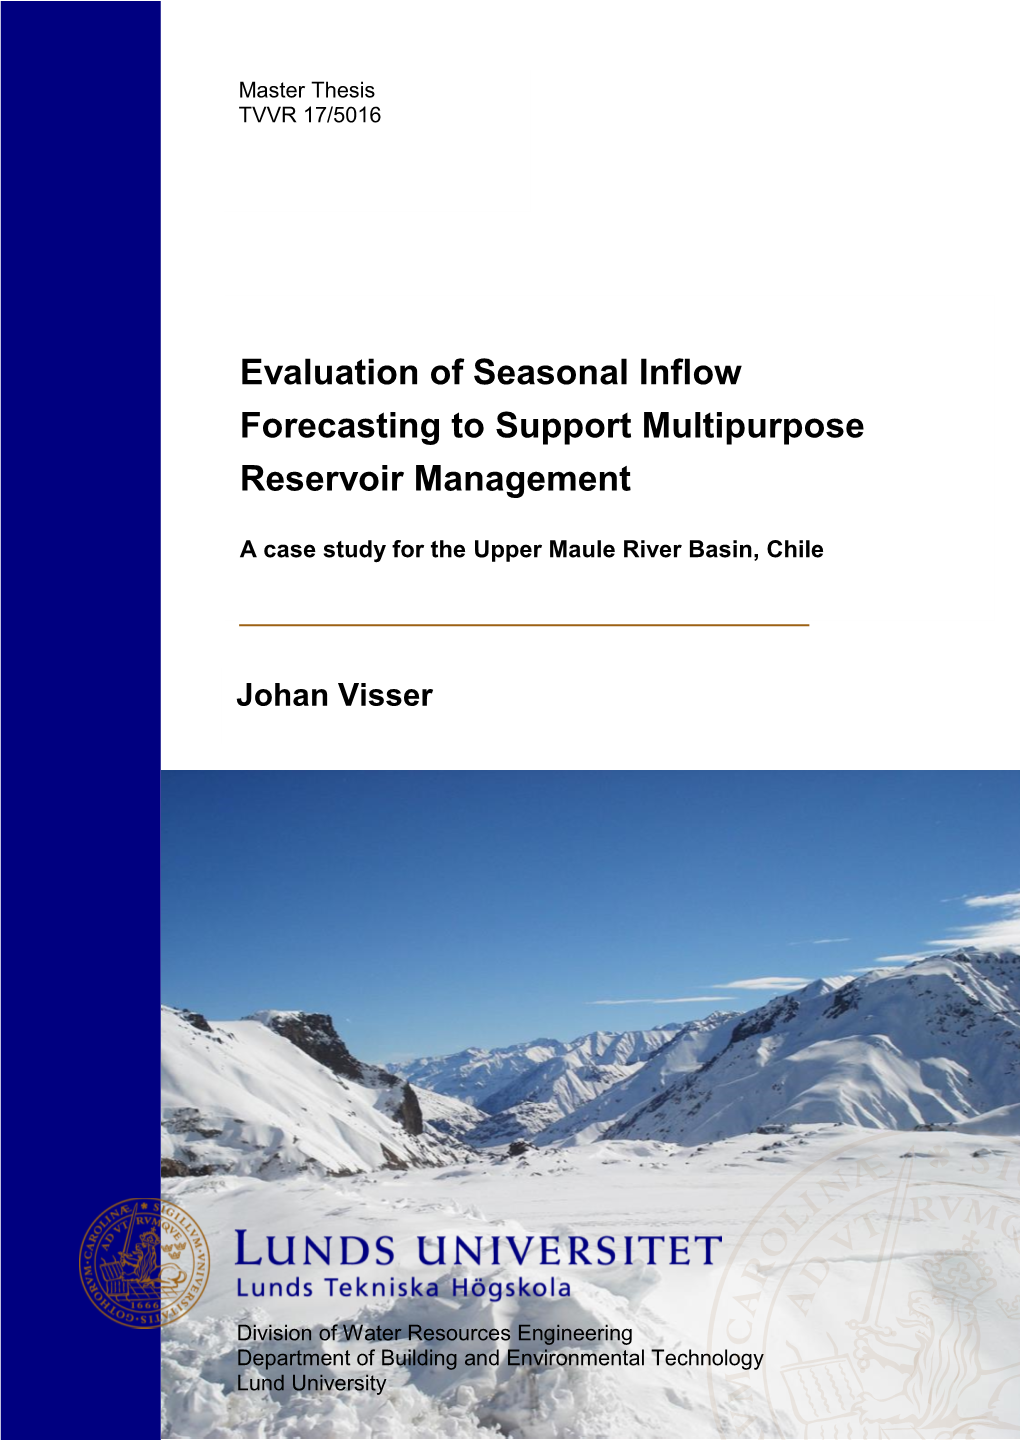 Evaluation of Seasonal Forecasting of Reservoir Inflows to Support Water